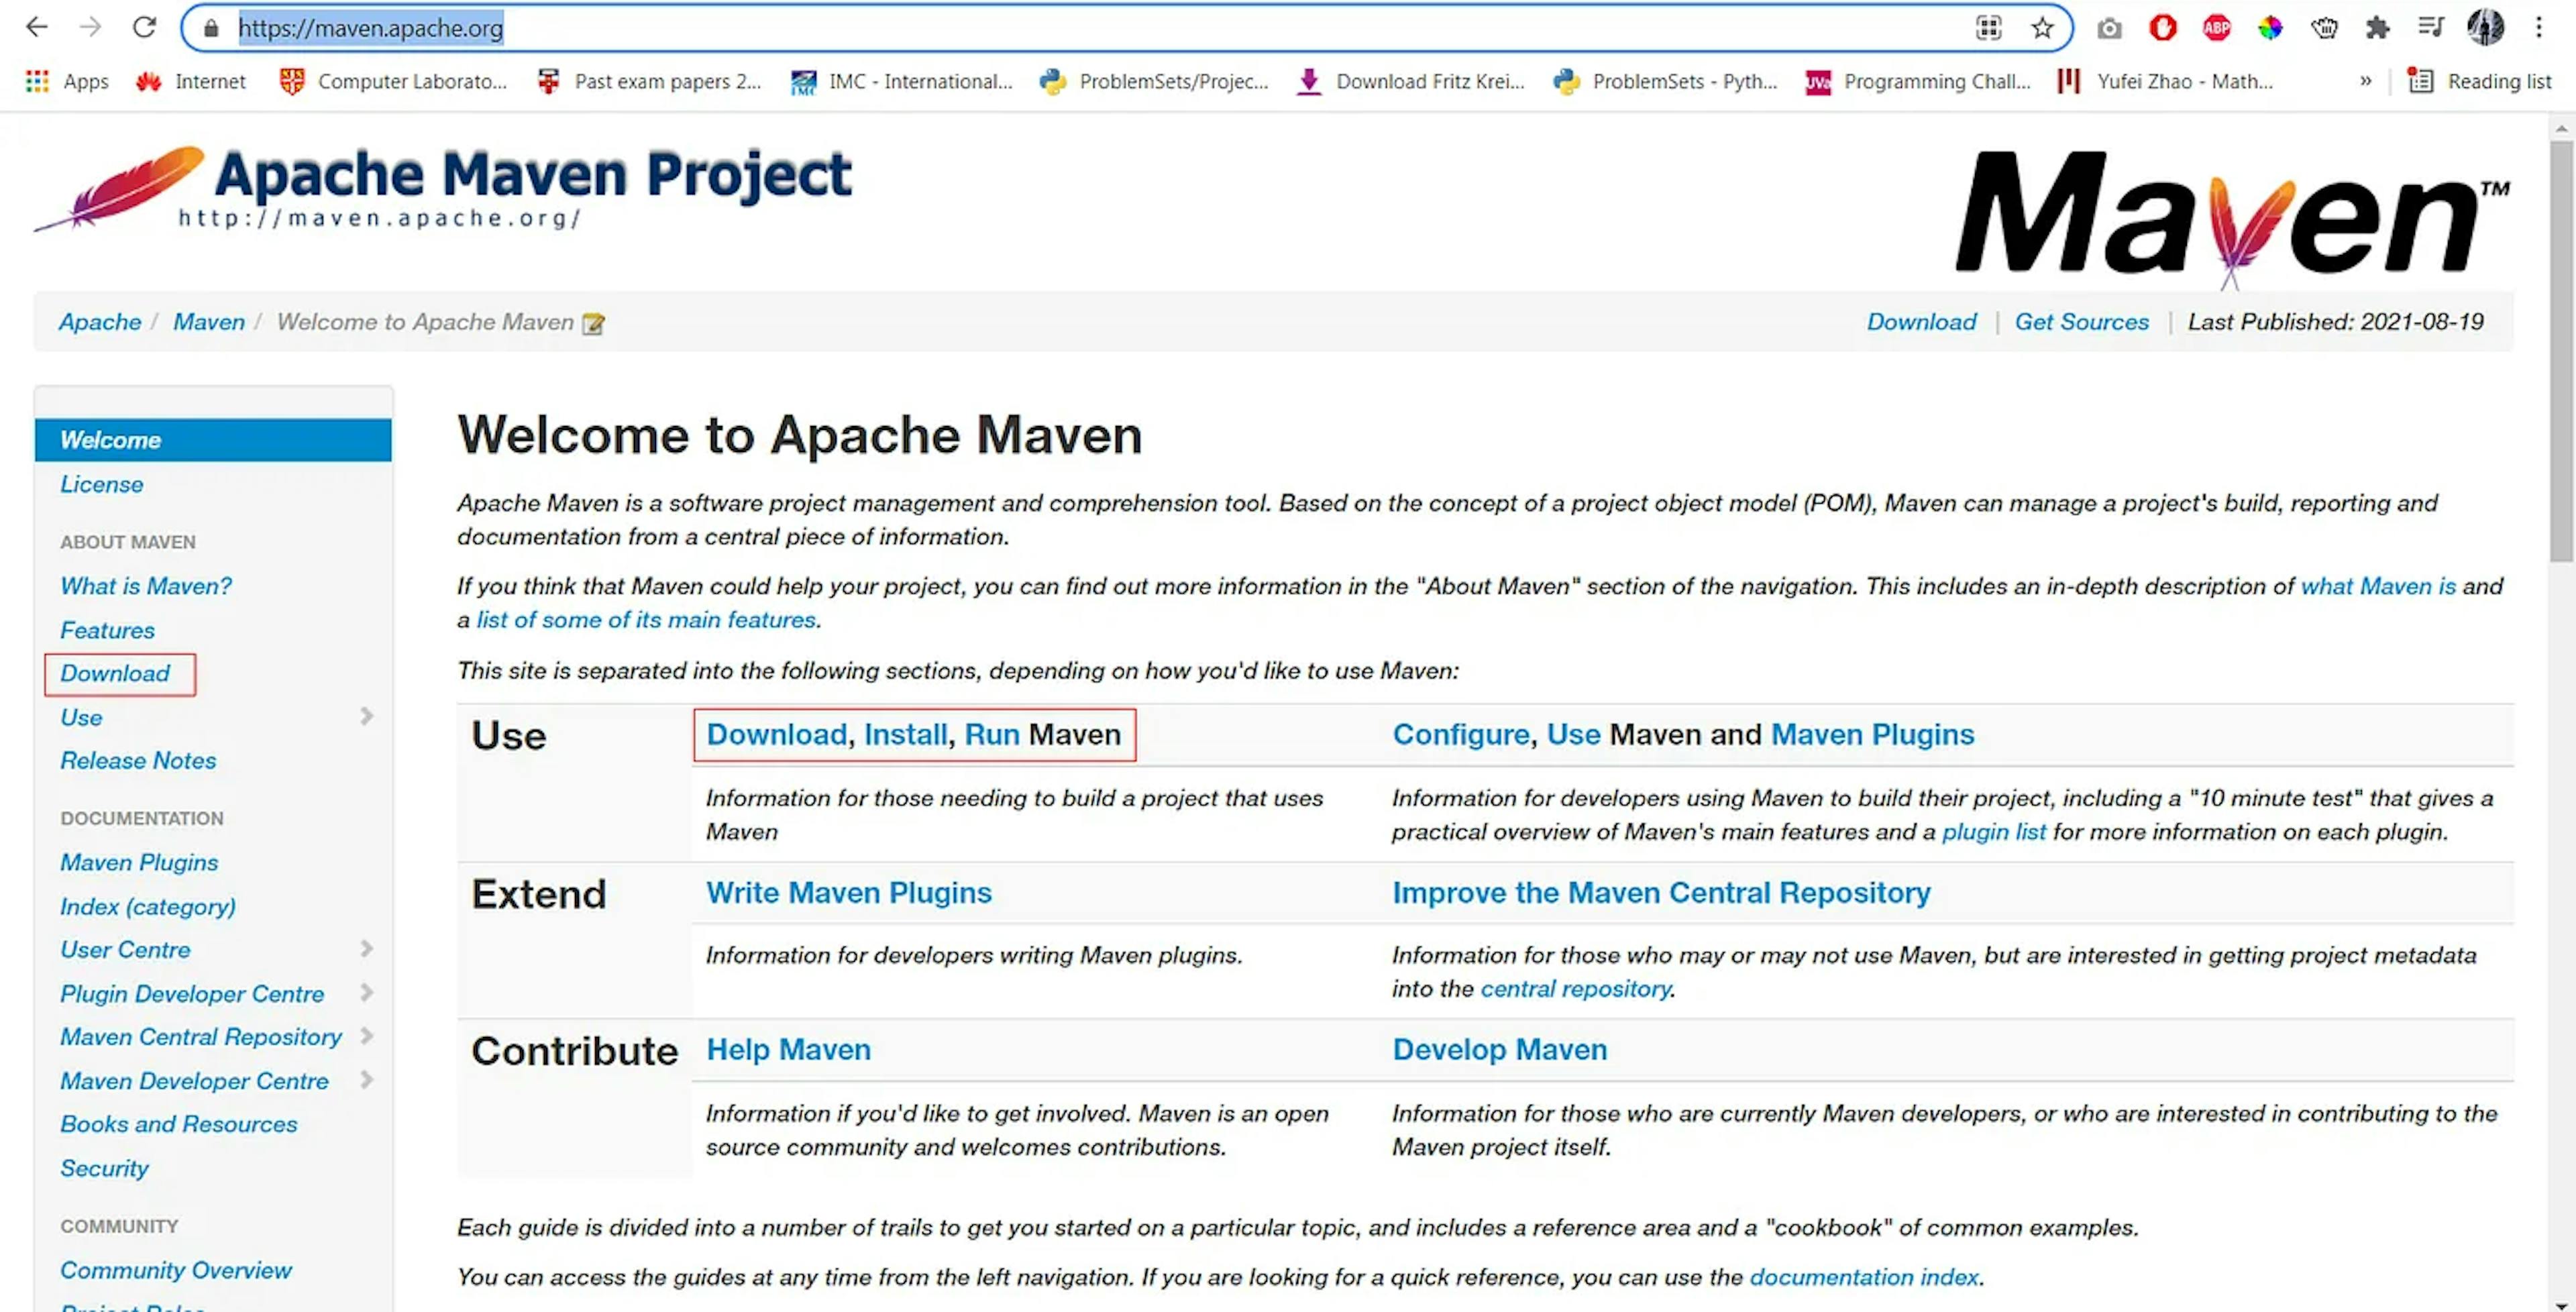 Home page of  http://maven.apache.org/